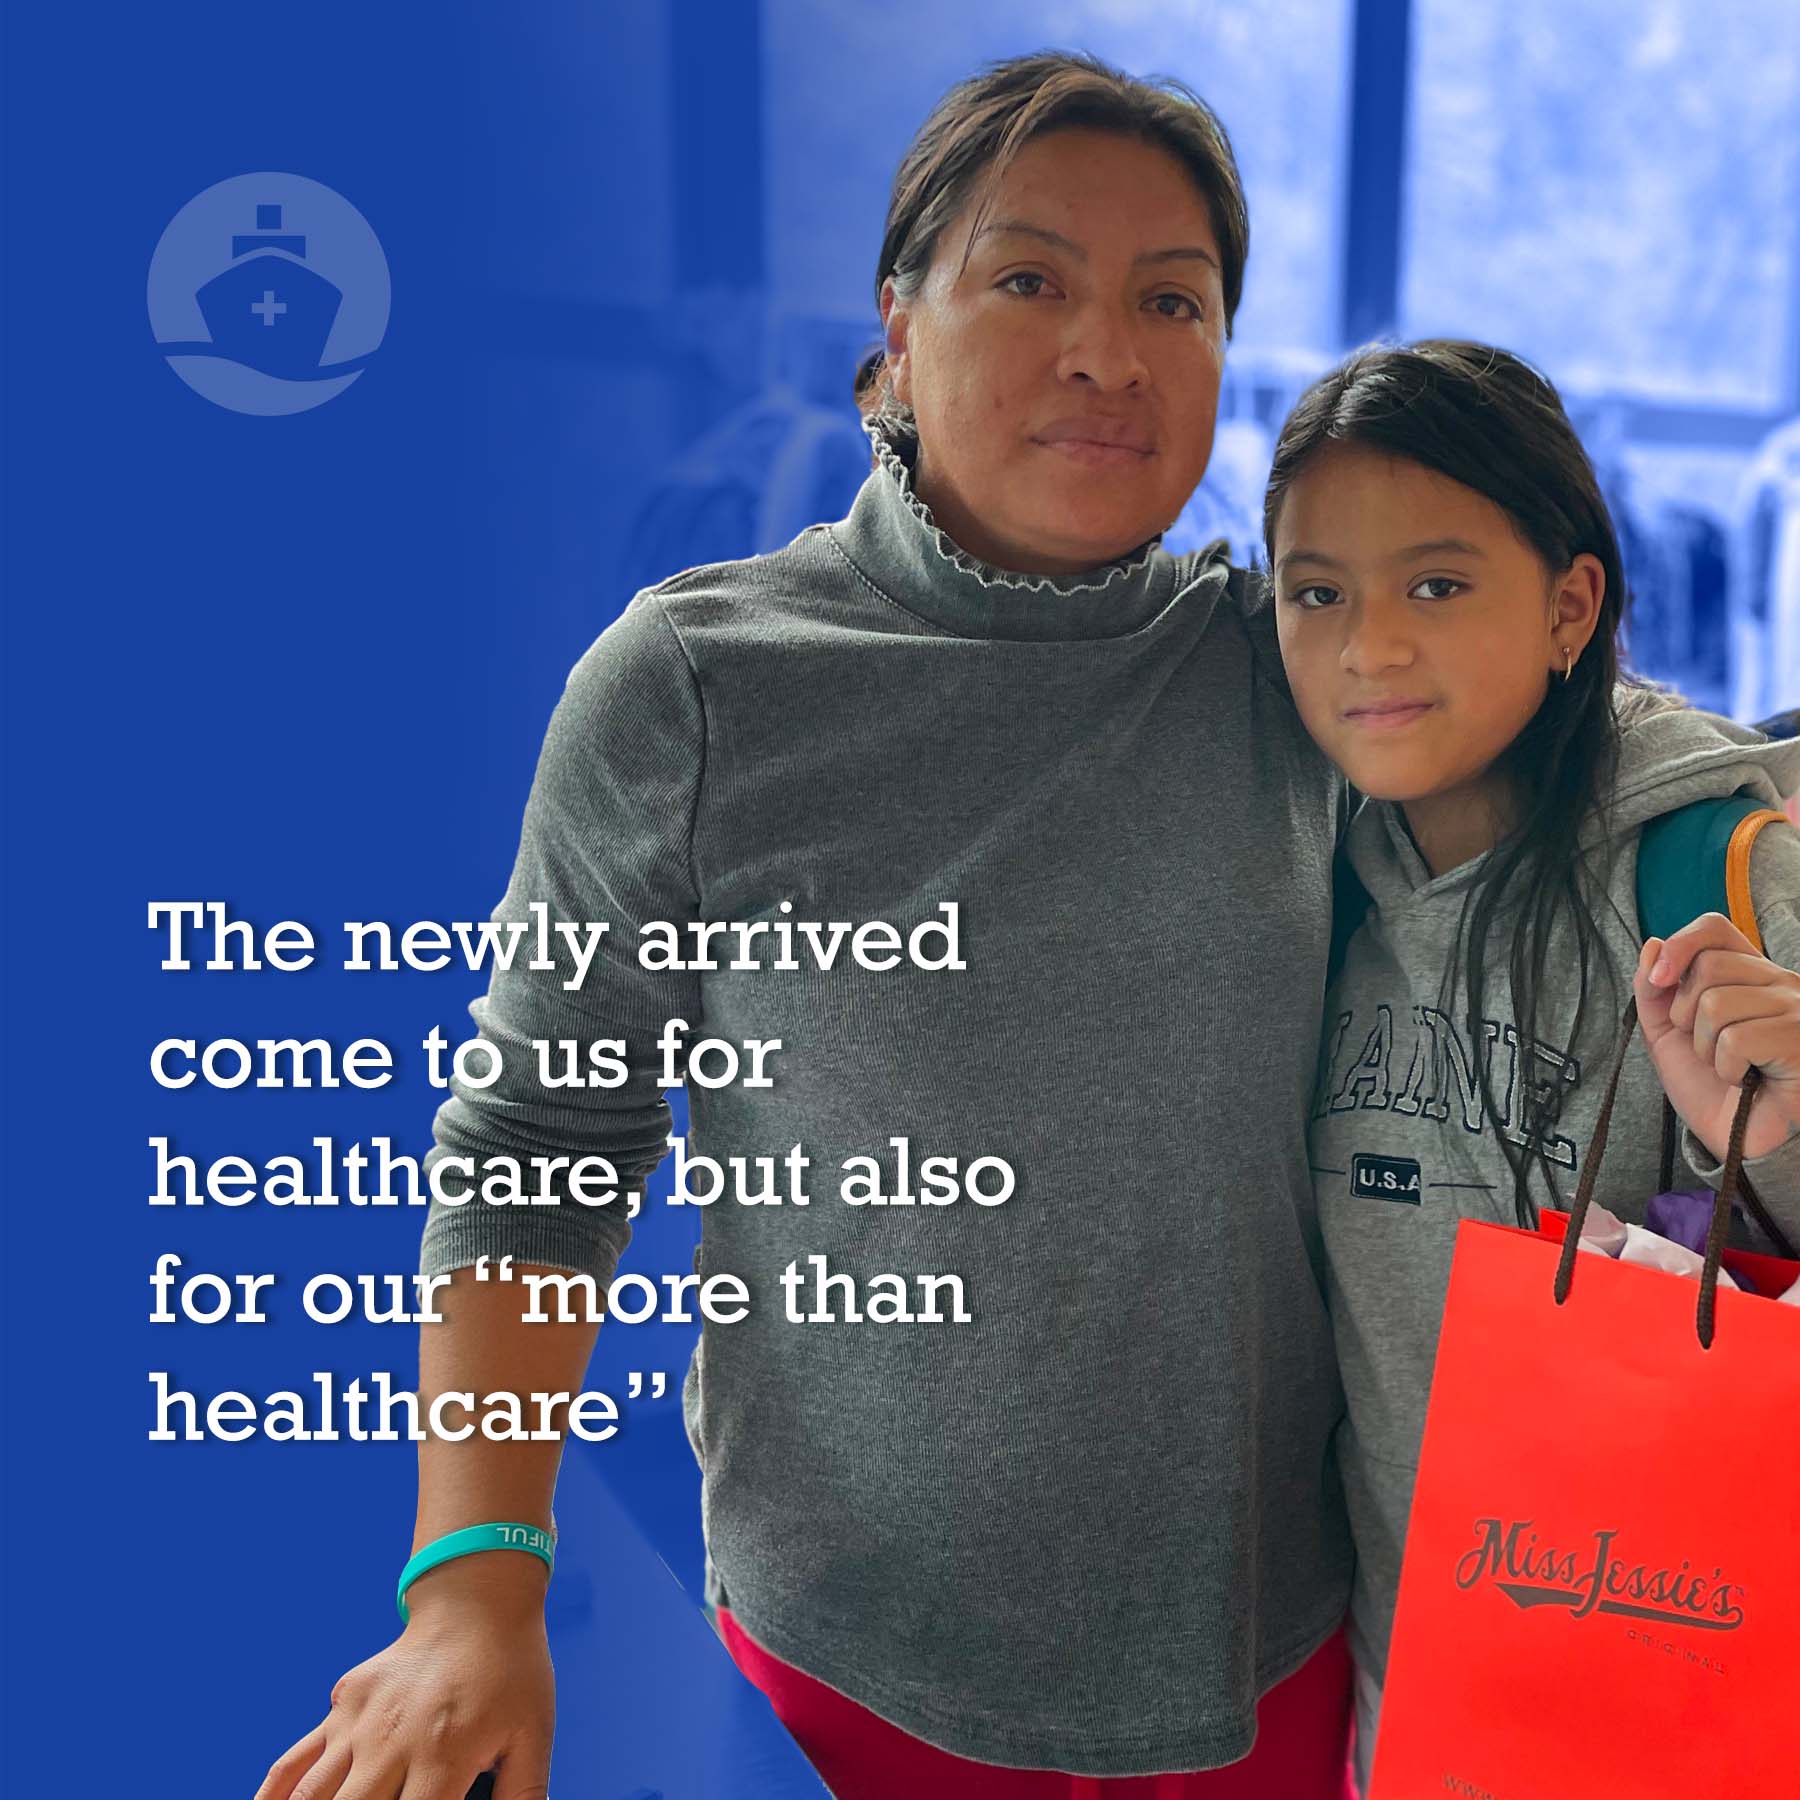 The newly arrived come to us for healthcare, but also for our “more than healthcare”